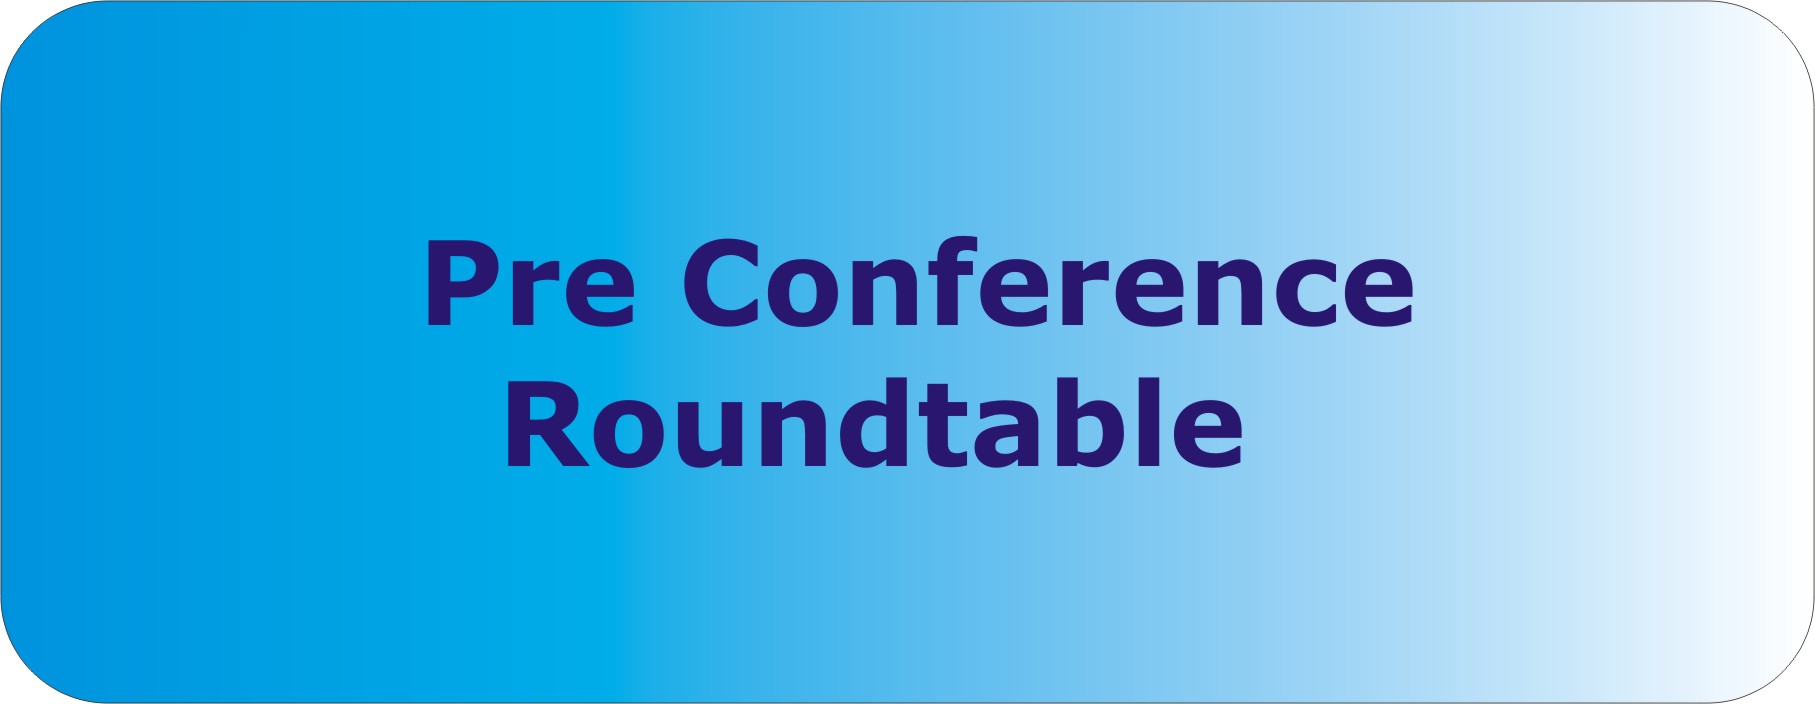 Pre Conference Roundtable